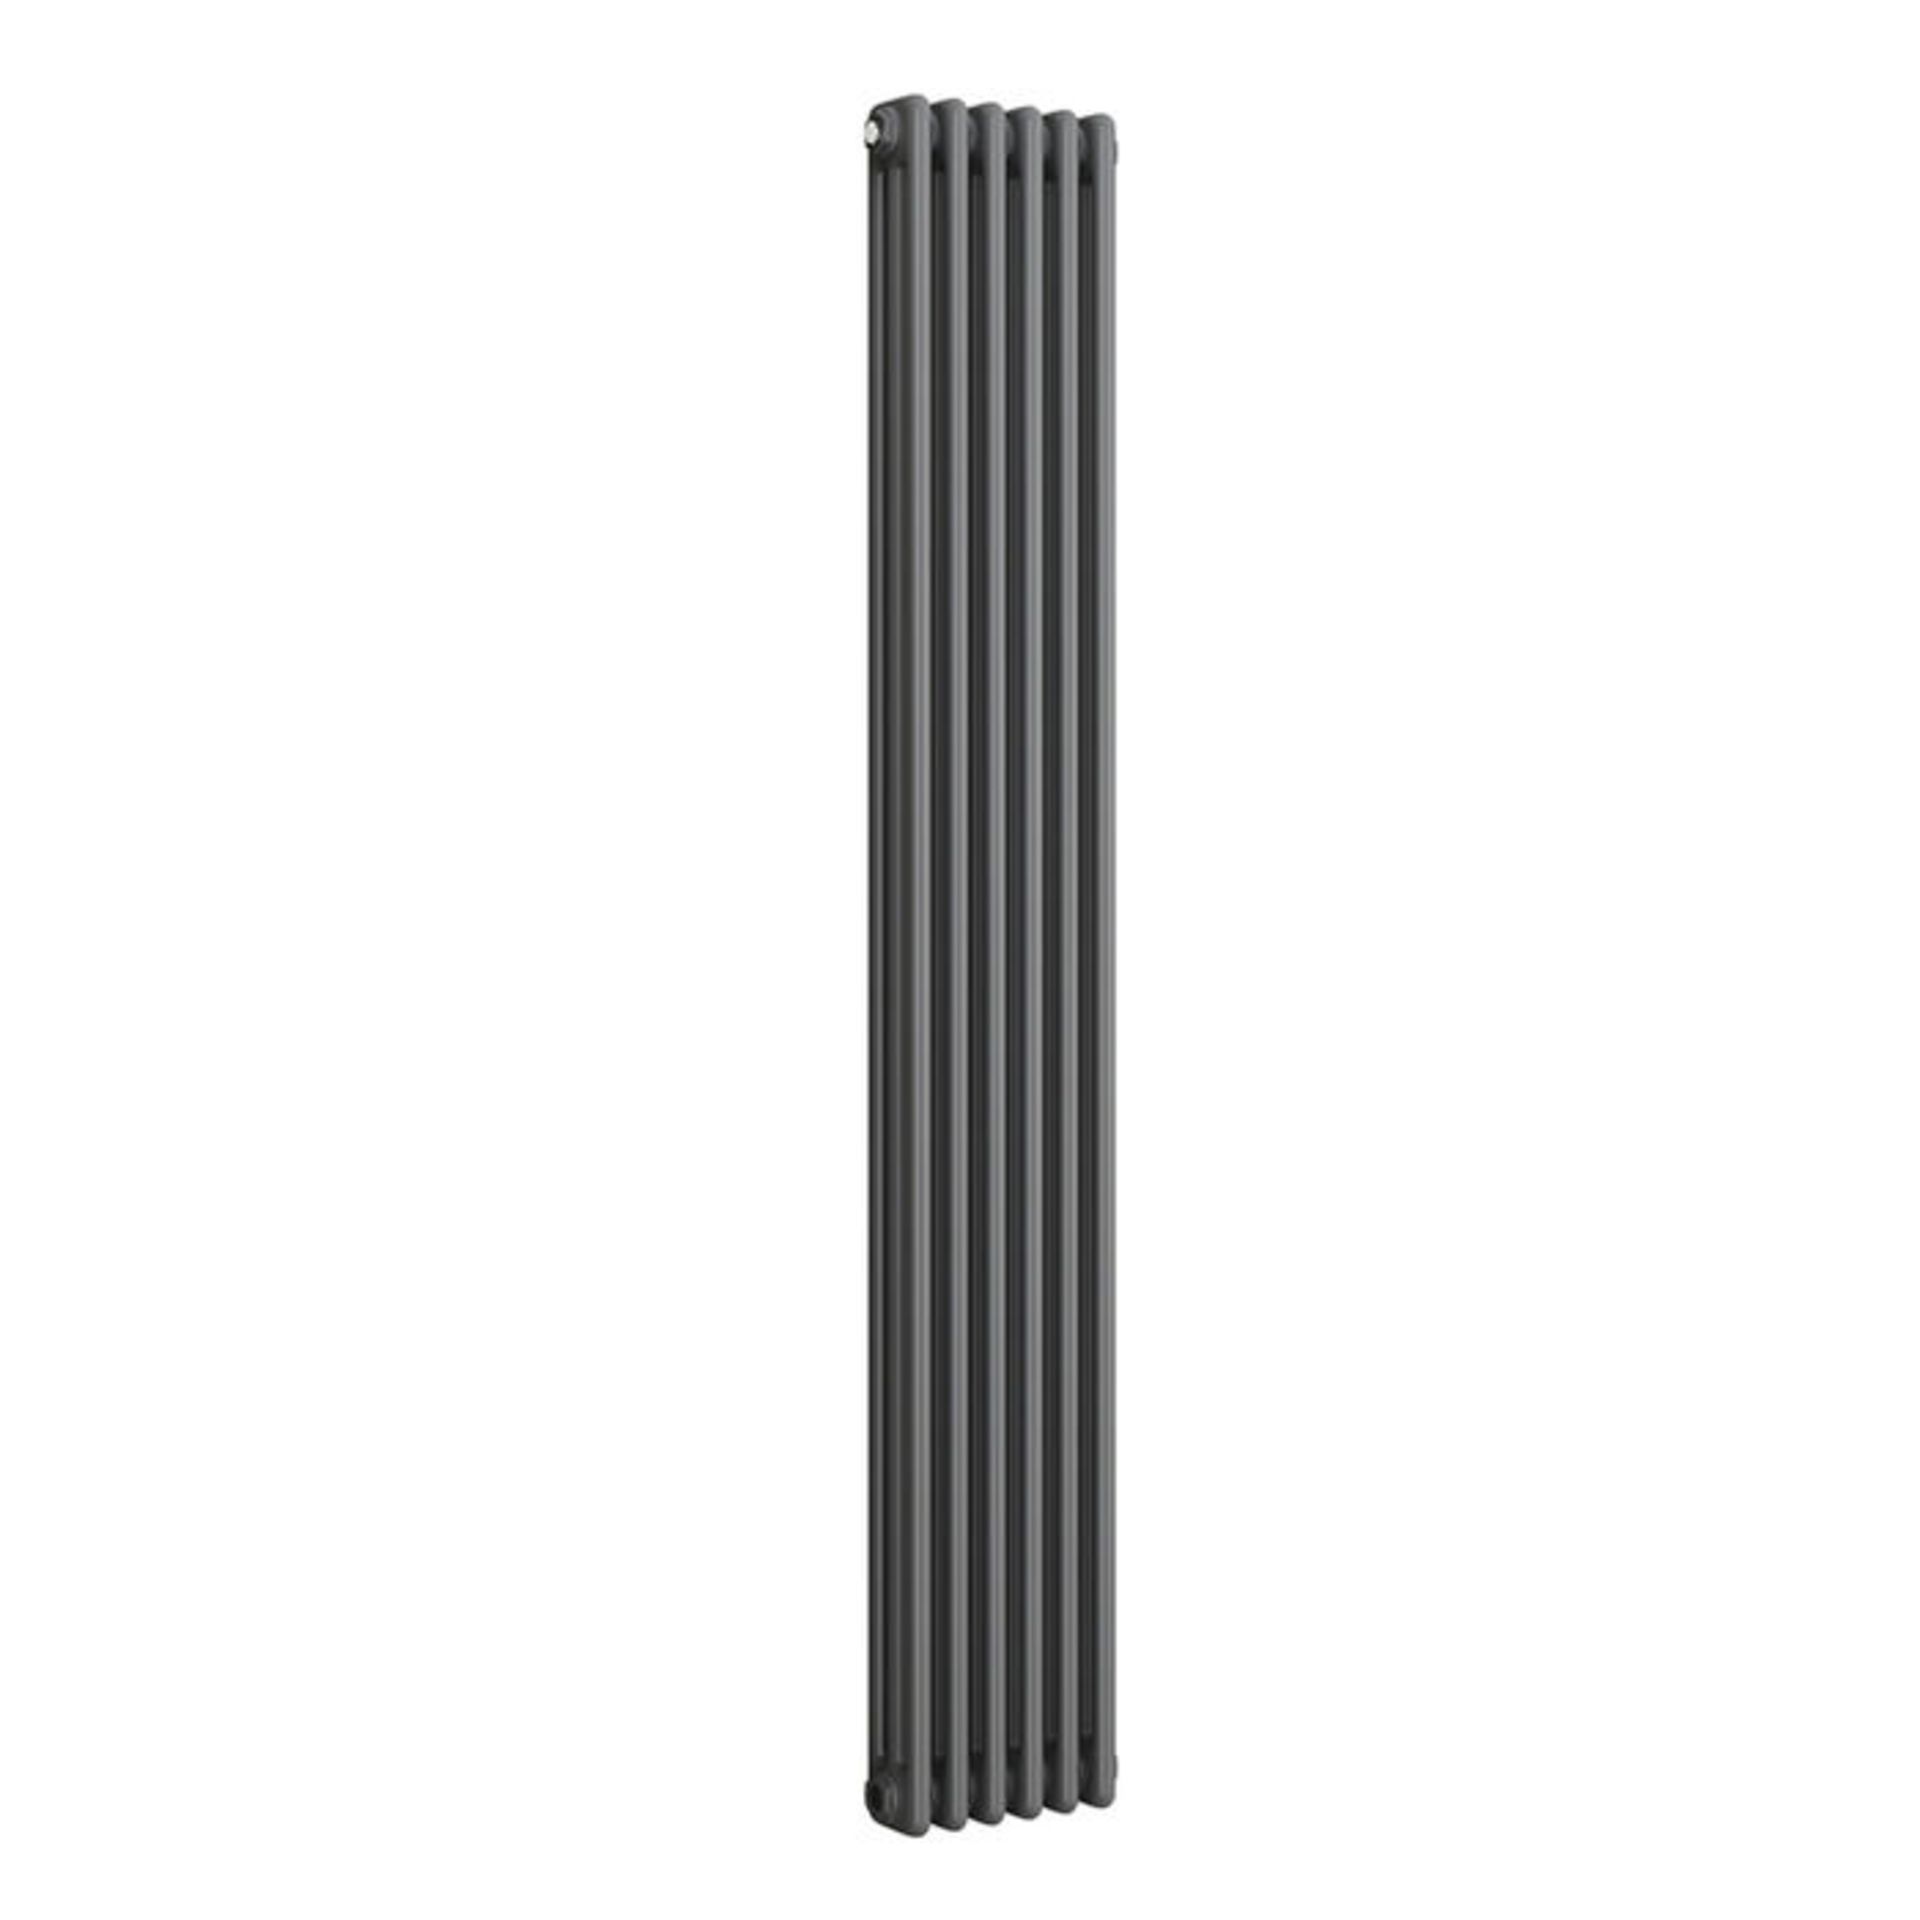 (AL183) 1800x290mm Anthracite Triple Panel Vertical Colosseum Traditional Radiator. RRP £499.99. - Image 4 of 4